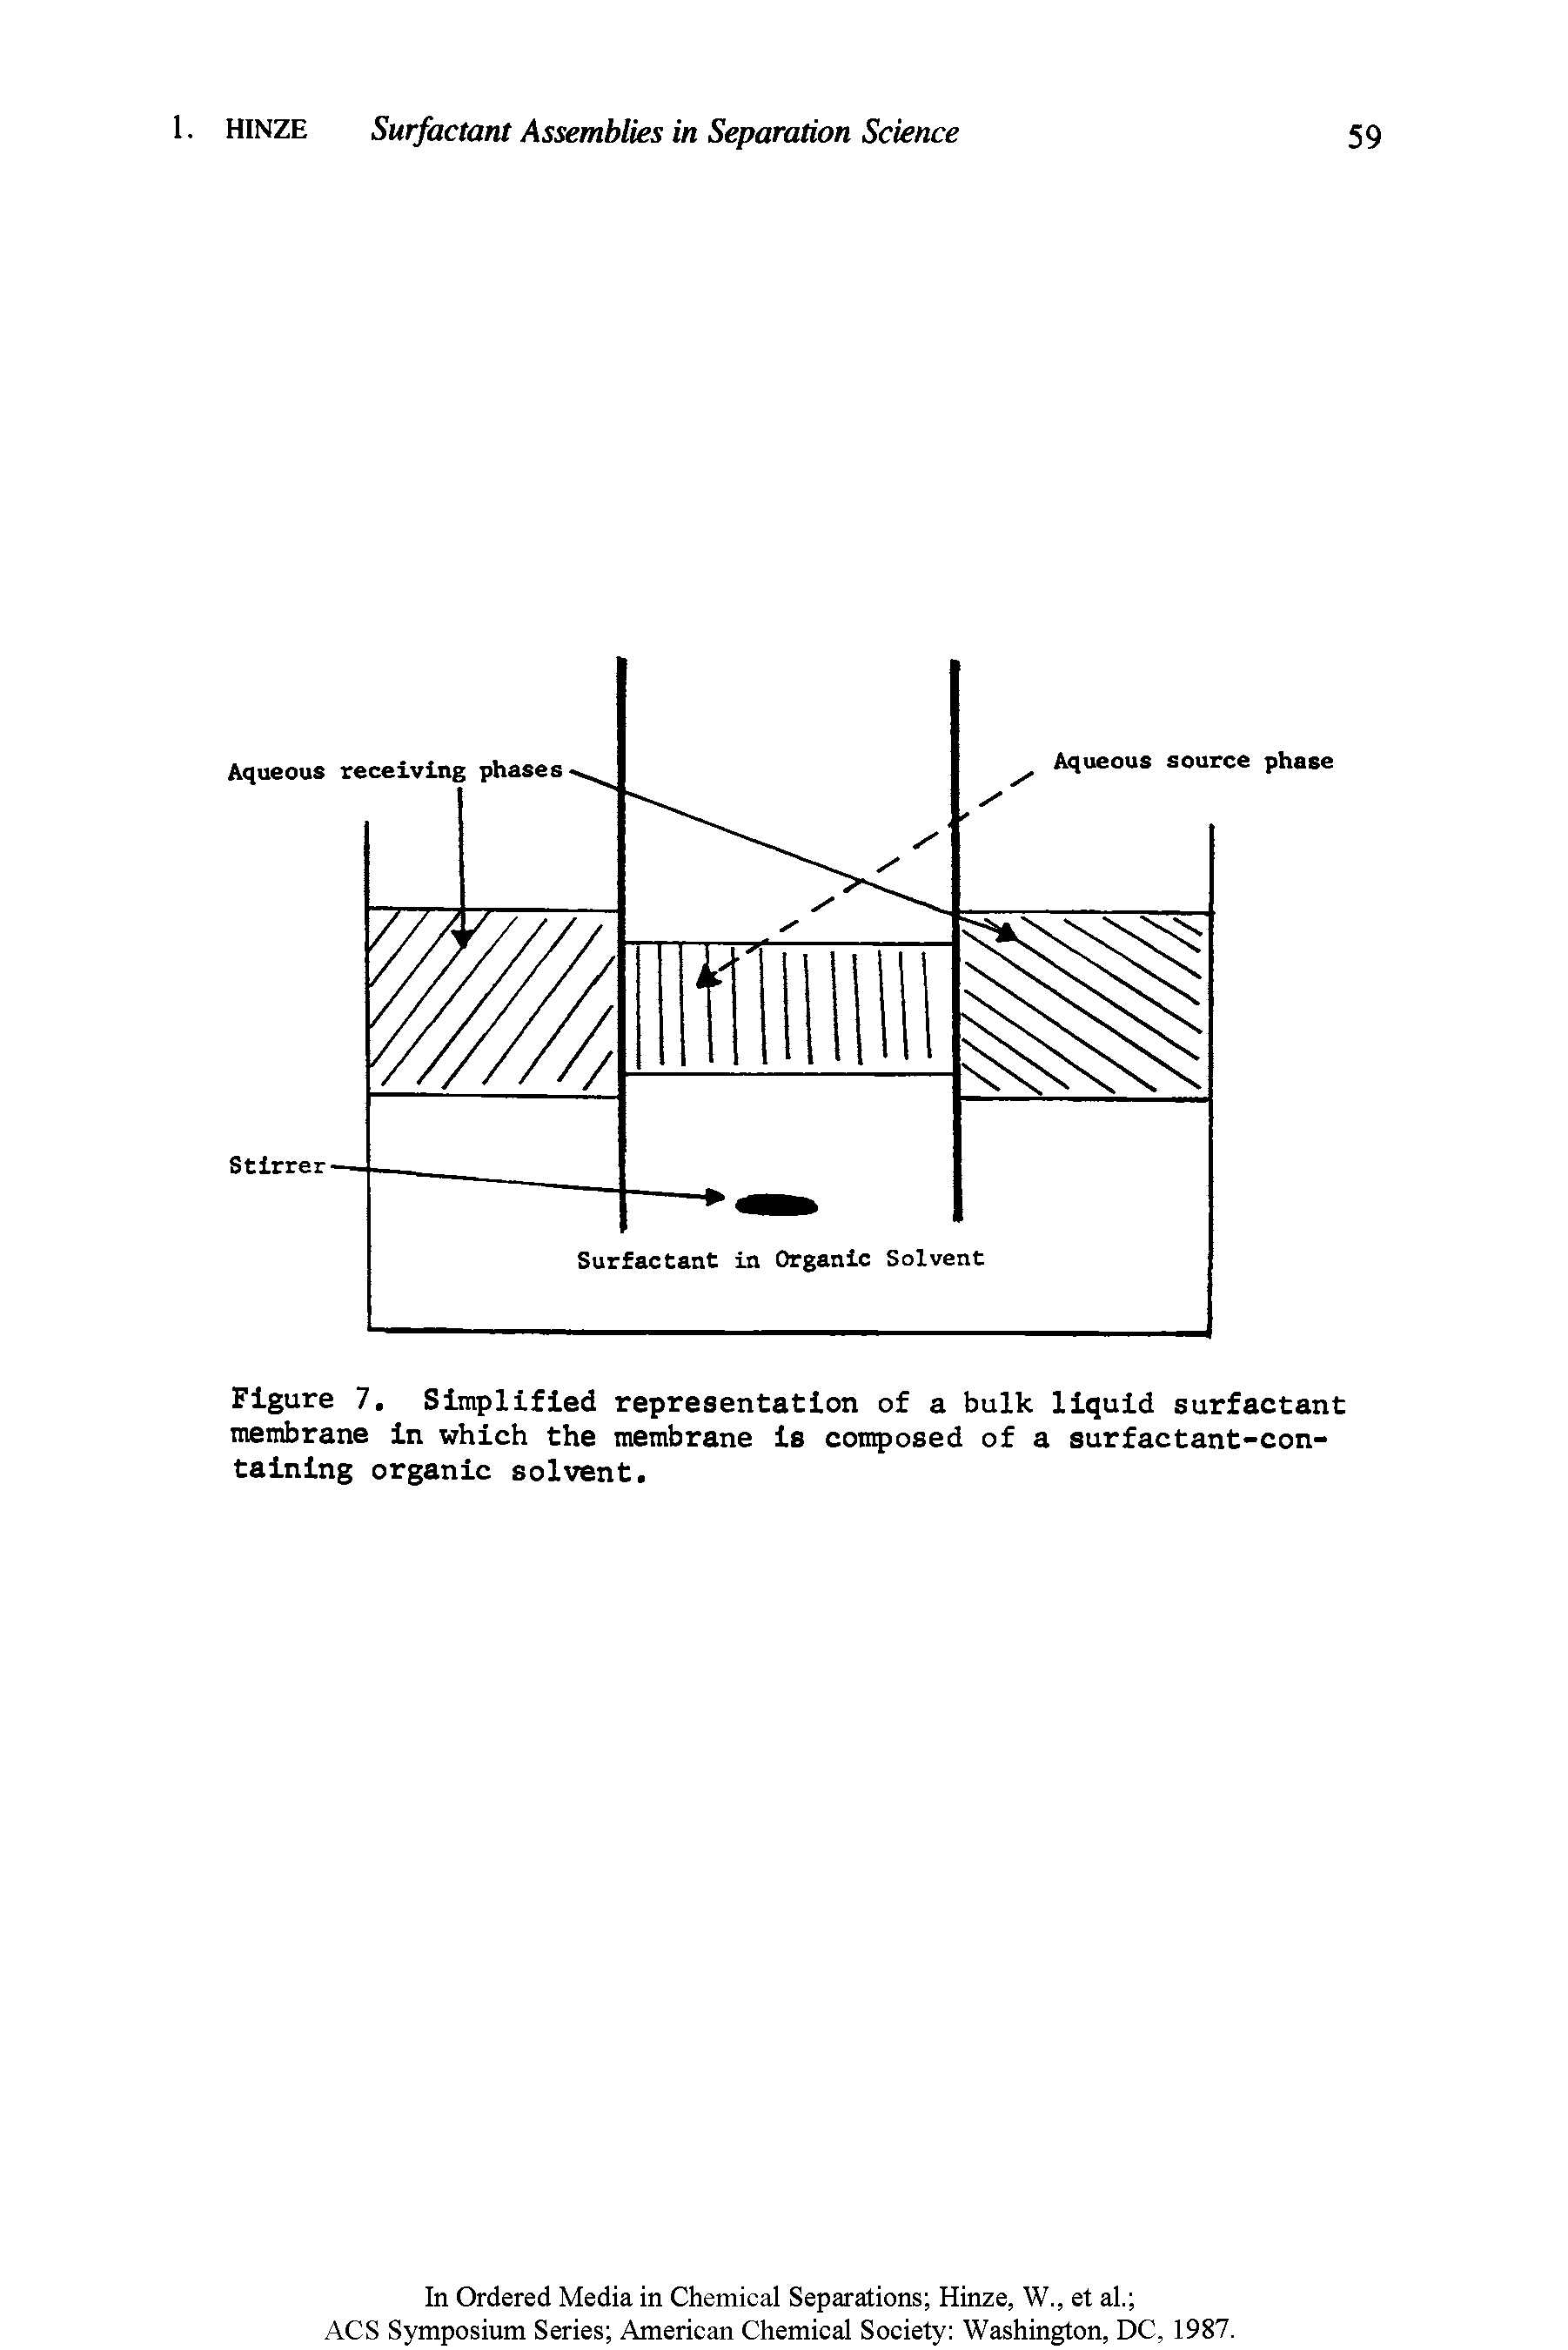 Figure 7. Simplified representation of a bulk liquid surfactant membrane in which the membrane is composed of a surfactant-containing organic solvent.